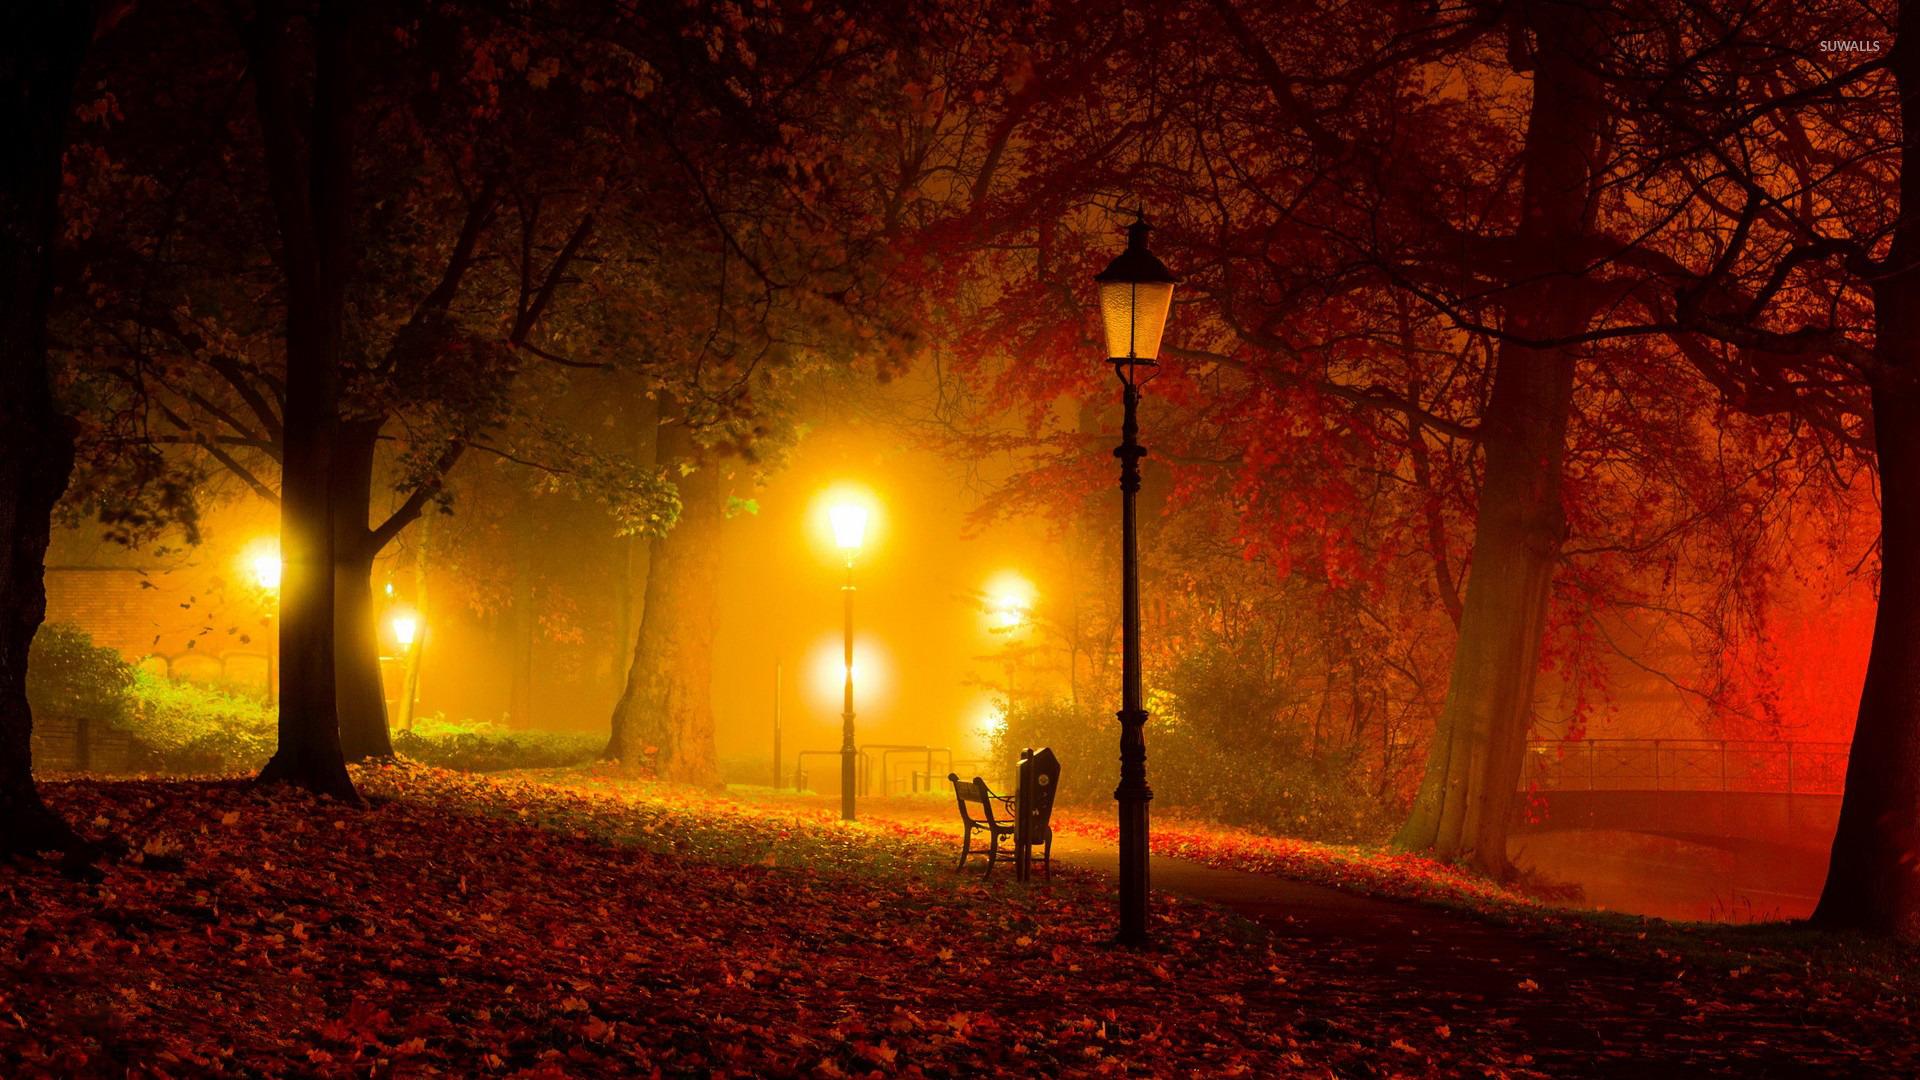 Amazing colors in the autumn park wallpaper wallpaper